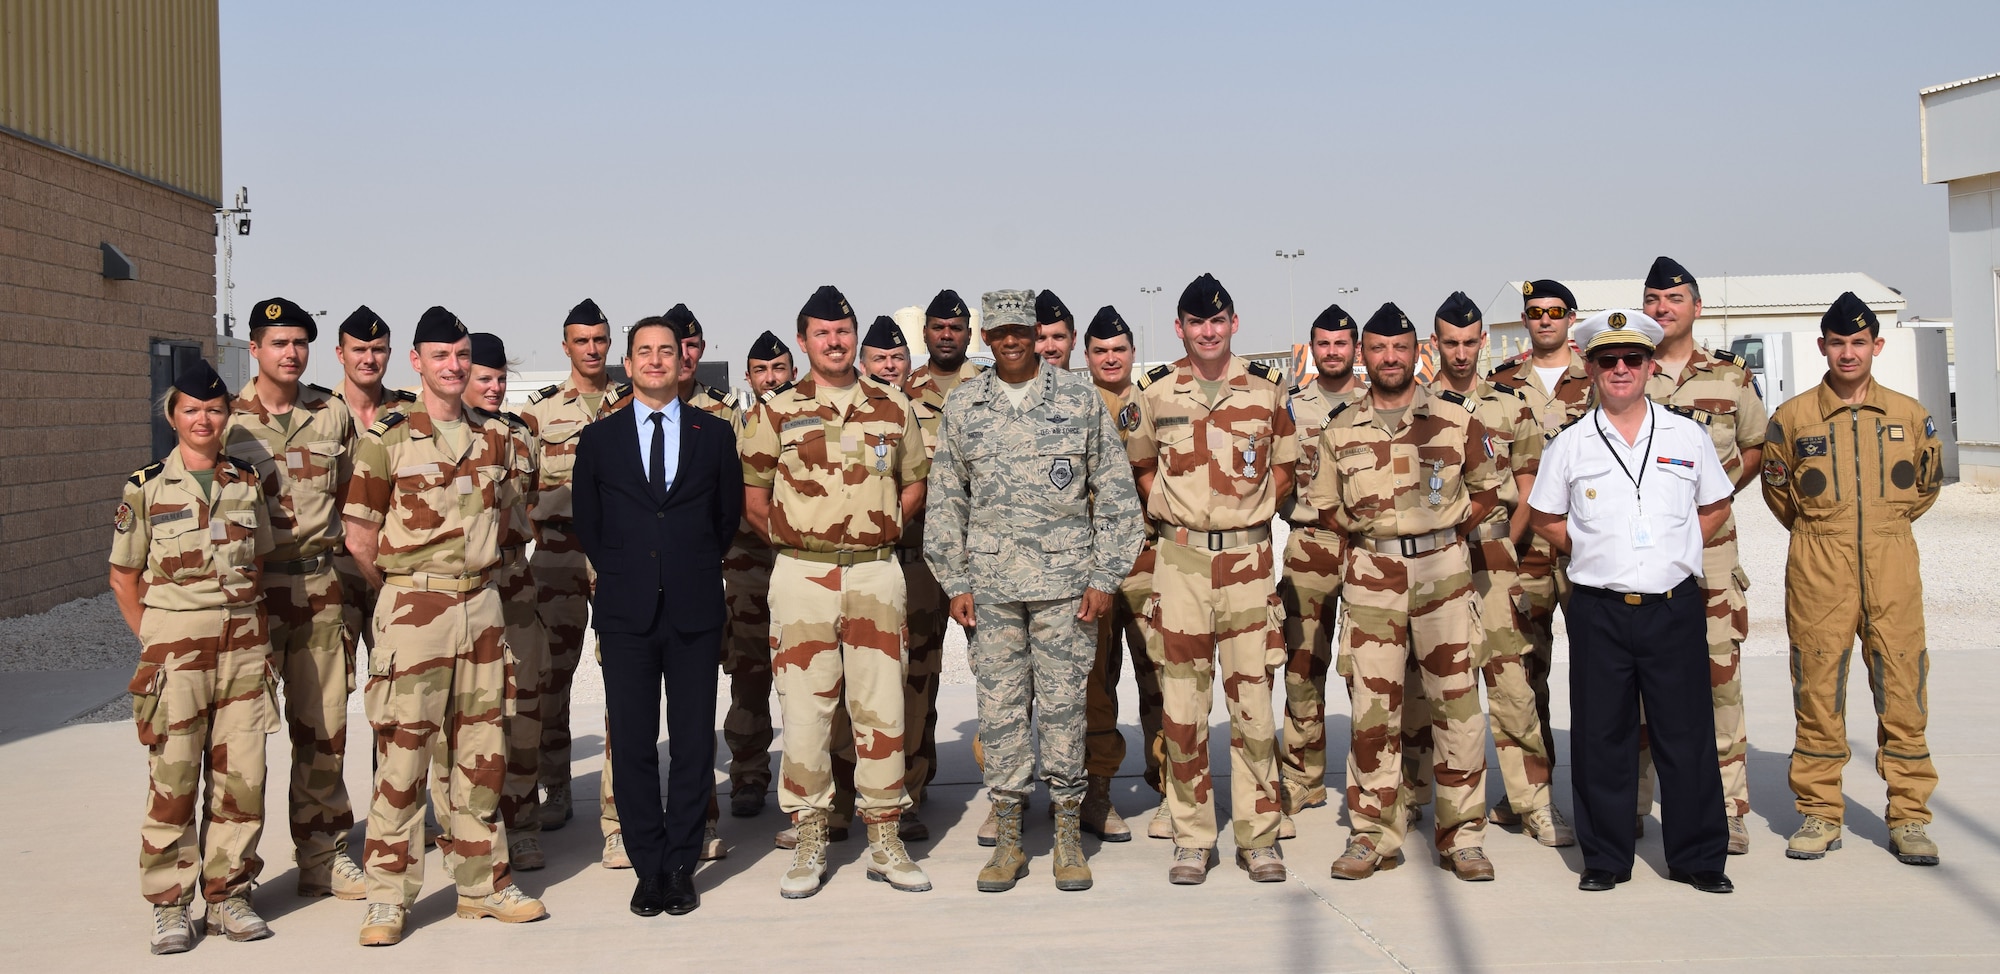 Coalition members from the French Air Force pose for a photo after the Bastille Day ceremony July 14, 2016, at Al Udeid Air Base, Qatar. Monsieur Eric Chevallier, Ambassador of France to Qatar, and Lt. Gen. Charles Brown, U.S. Air Forces Central Command commander, awarded medals to French and U.S. personnel for their support to the 20-member air Coalition. (U.S. Air Force photo/Technical Sgt. Carlos J. Treviño/Released)